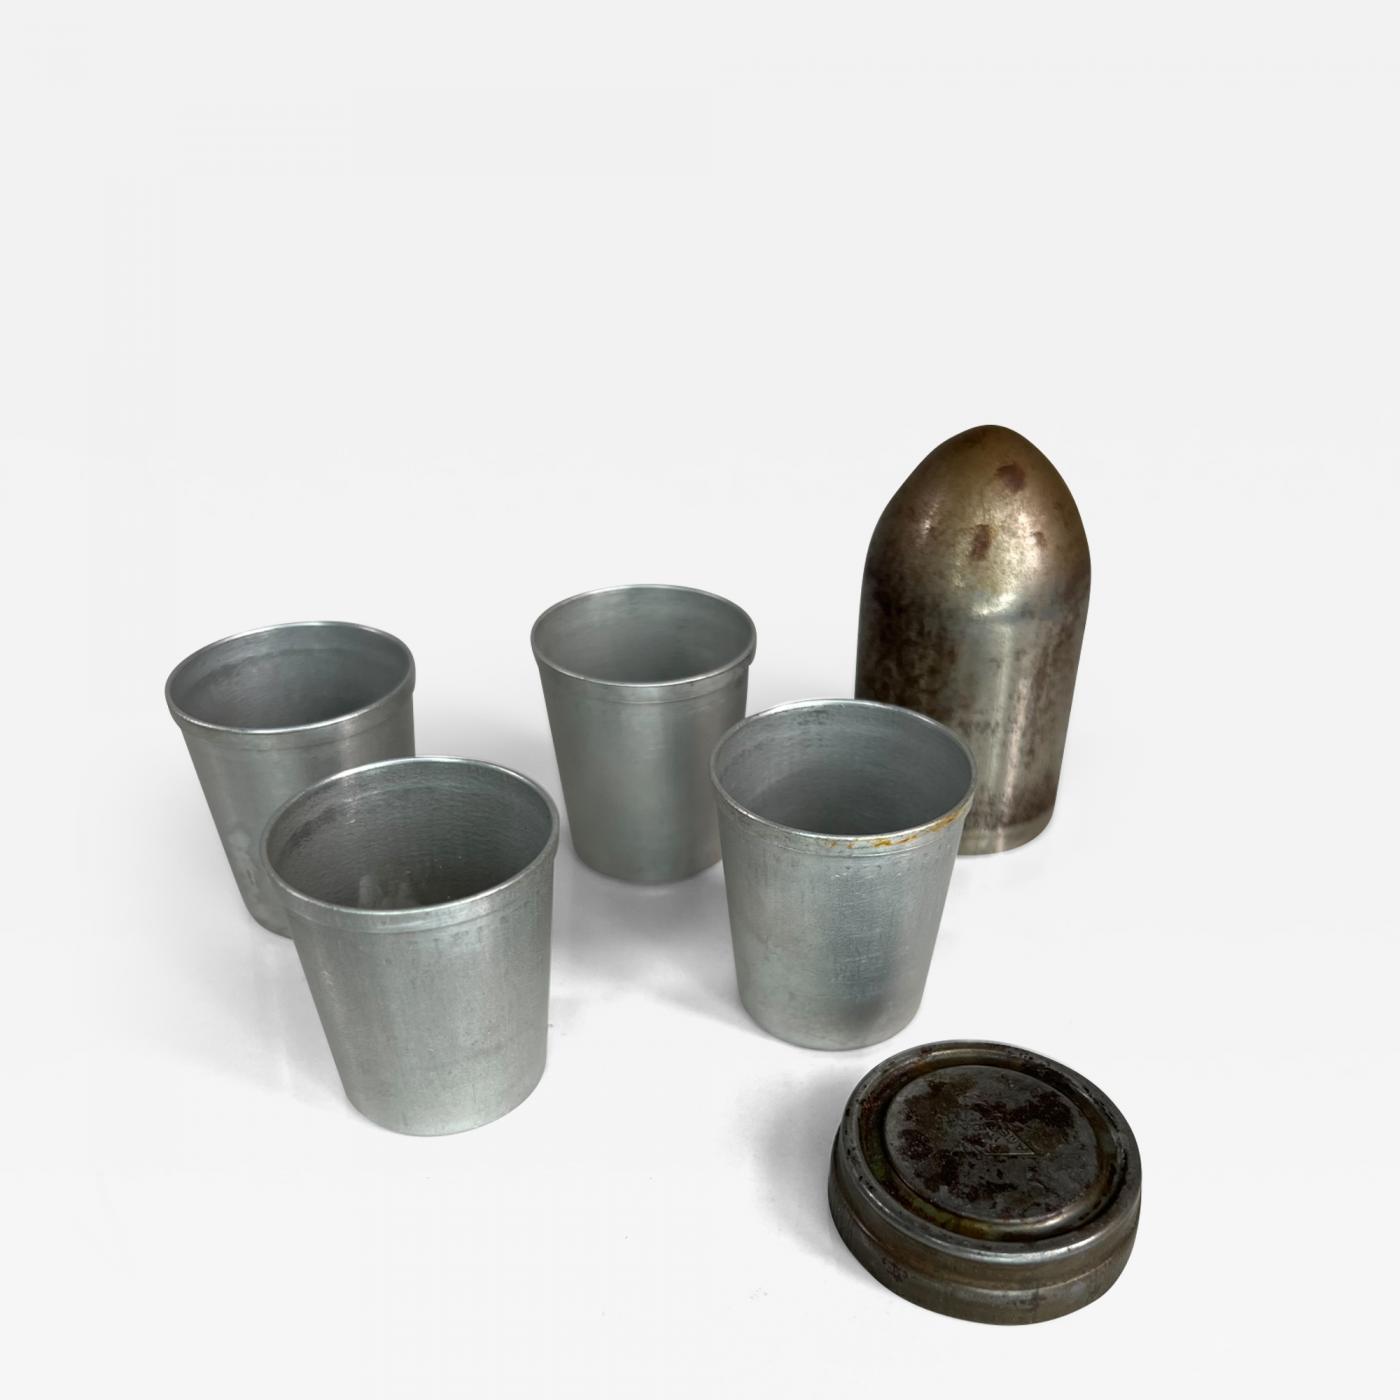 https://cdn.incollect.com/sites/default/files/zoom/-Abercrombie-Fitch-1950s-American-Vintage-Set-of-4-Nesting-Travel-Shot-Cups-Bullet-Case-606209-2878000.jpg